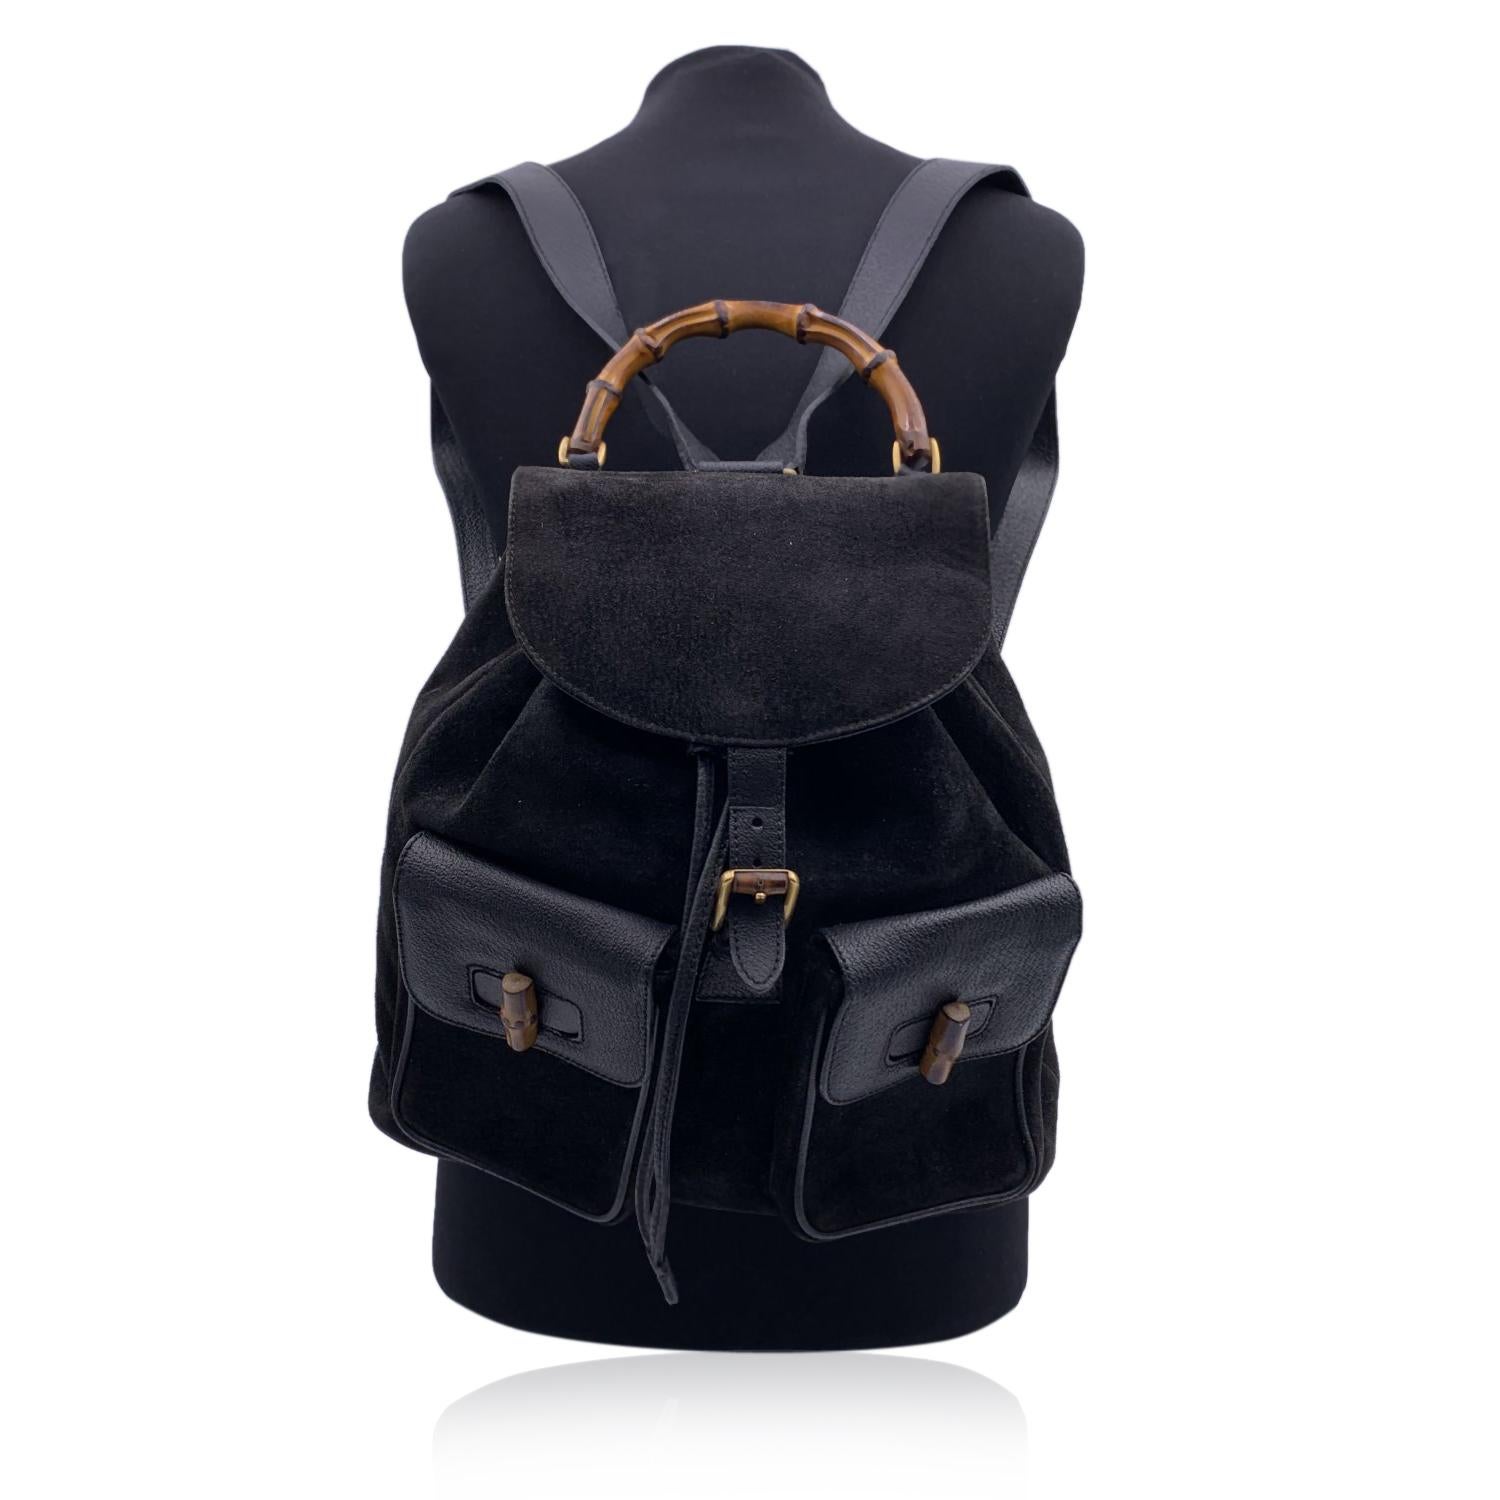 Vintage backpack by Gucci, crafted in black suede and leather. It features Bamboo handle and and knobs. Flap with buckle closure and drawstring top opening. Internal black diamond lining. 1 side zipper pocket inside (the zipper pull is missing).